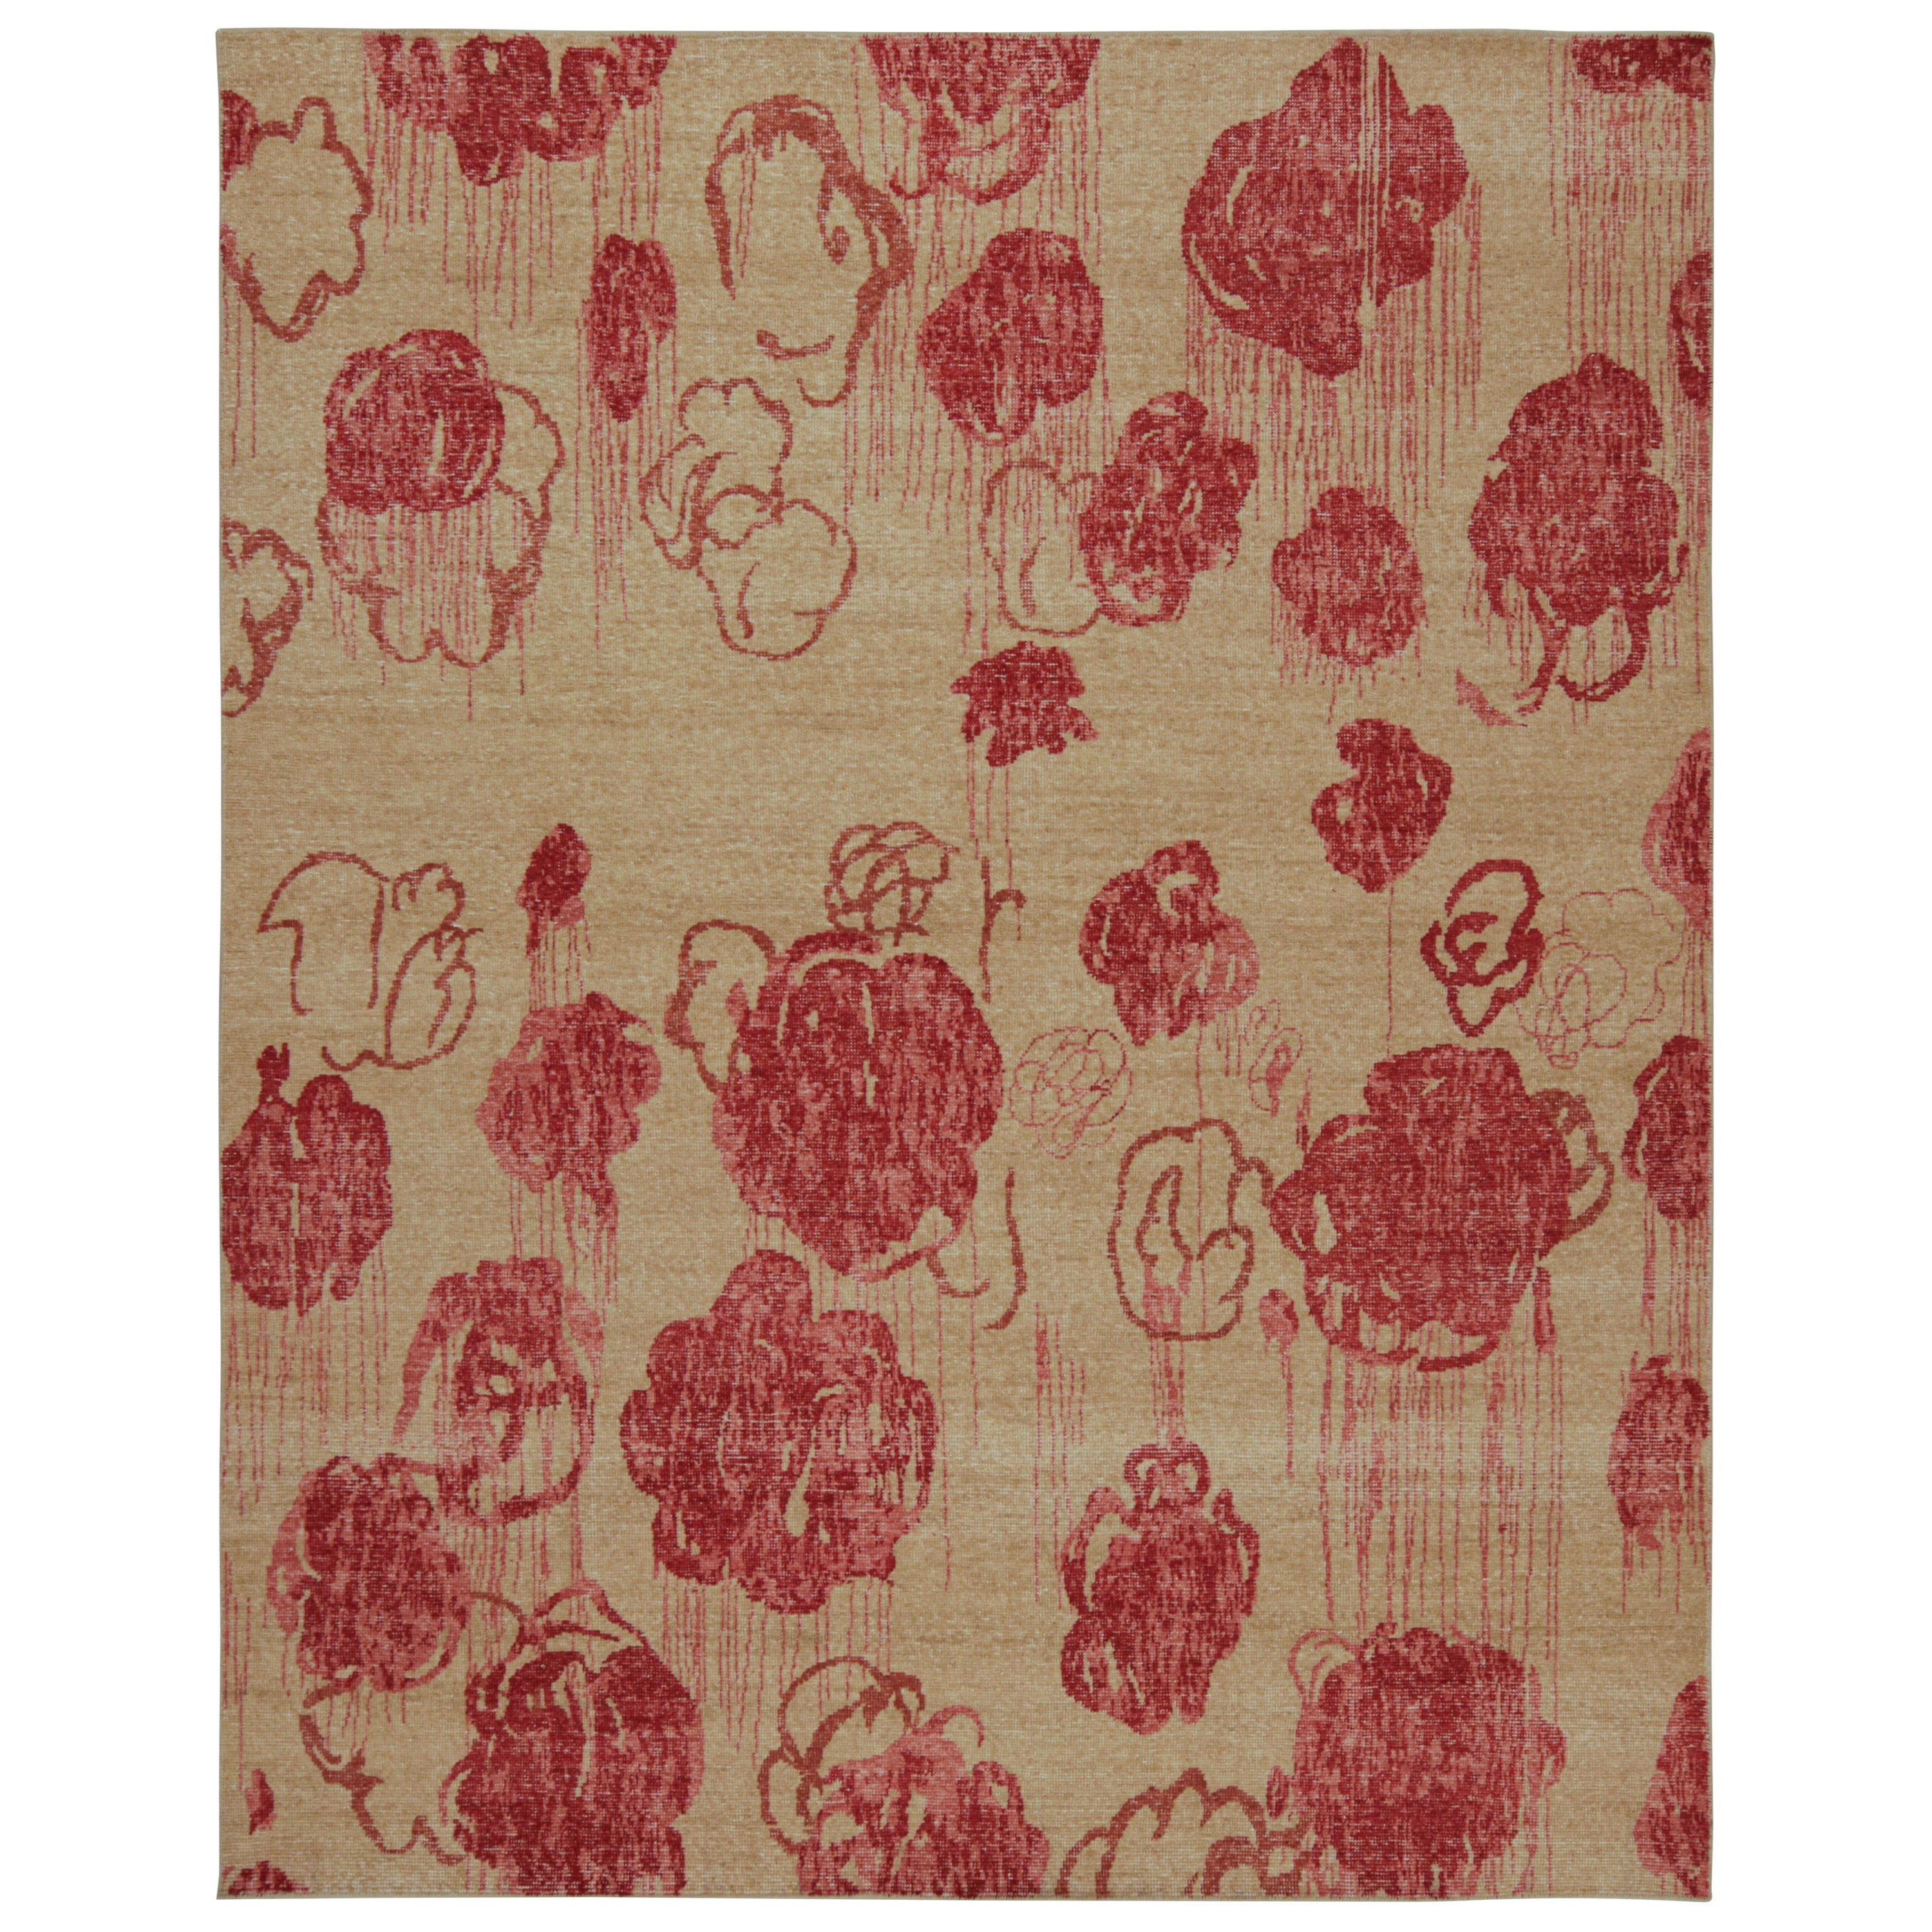 Rug & Kilim’s Contemporary Abstract Art Rug in Beige-Brown, with Floral Patterns For Sale